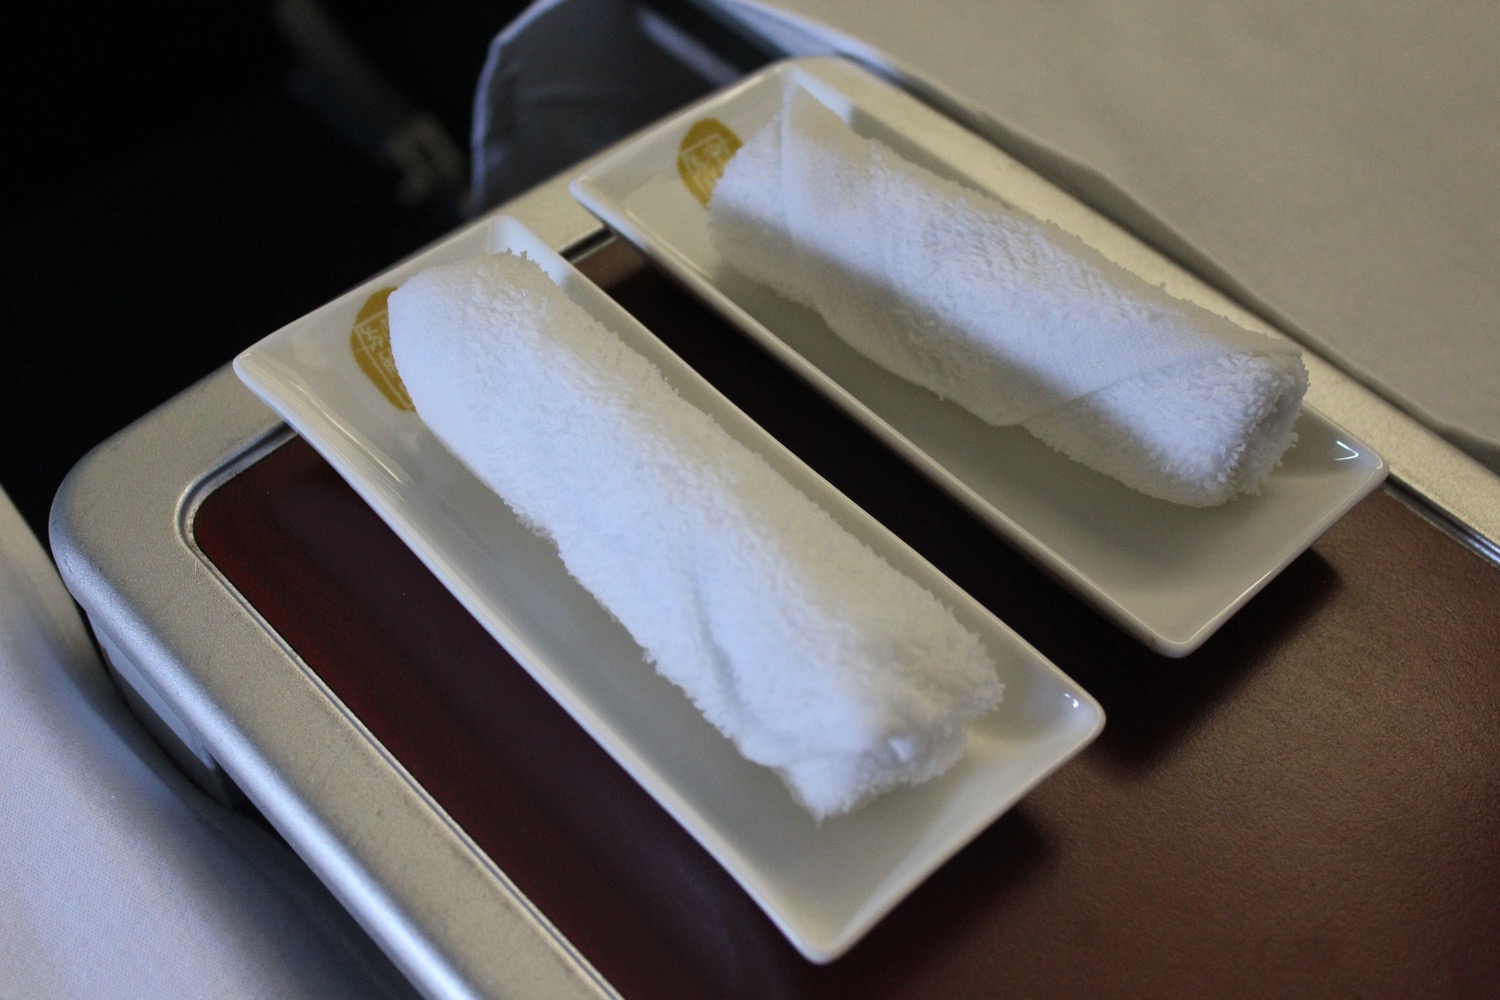 two plates with rolled up towels on them